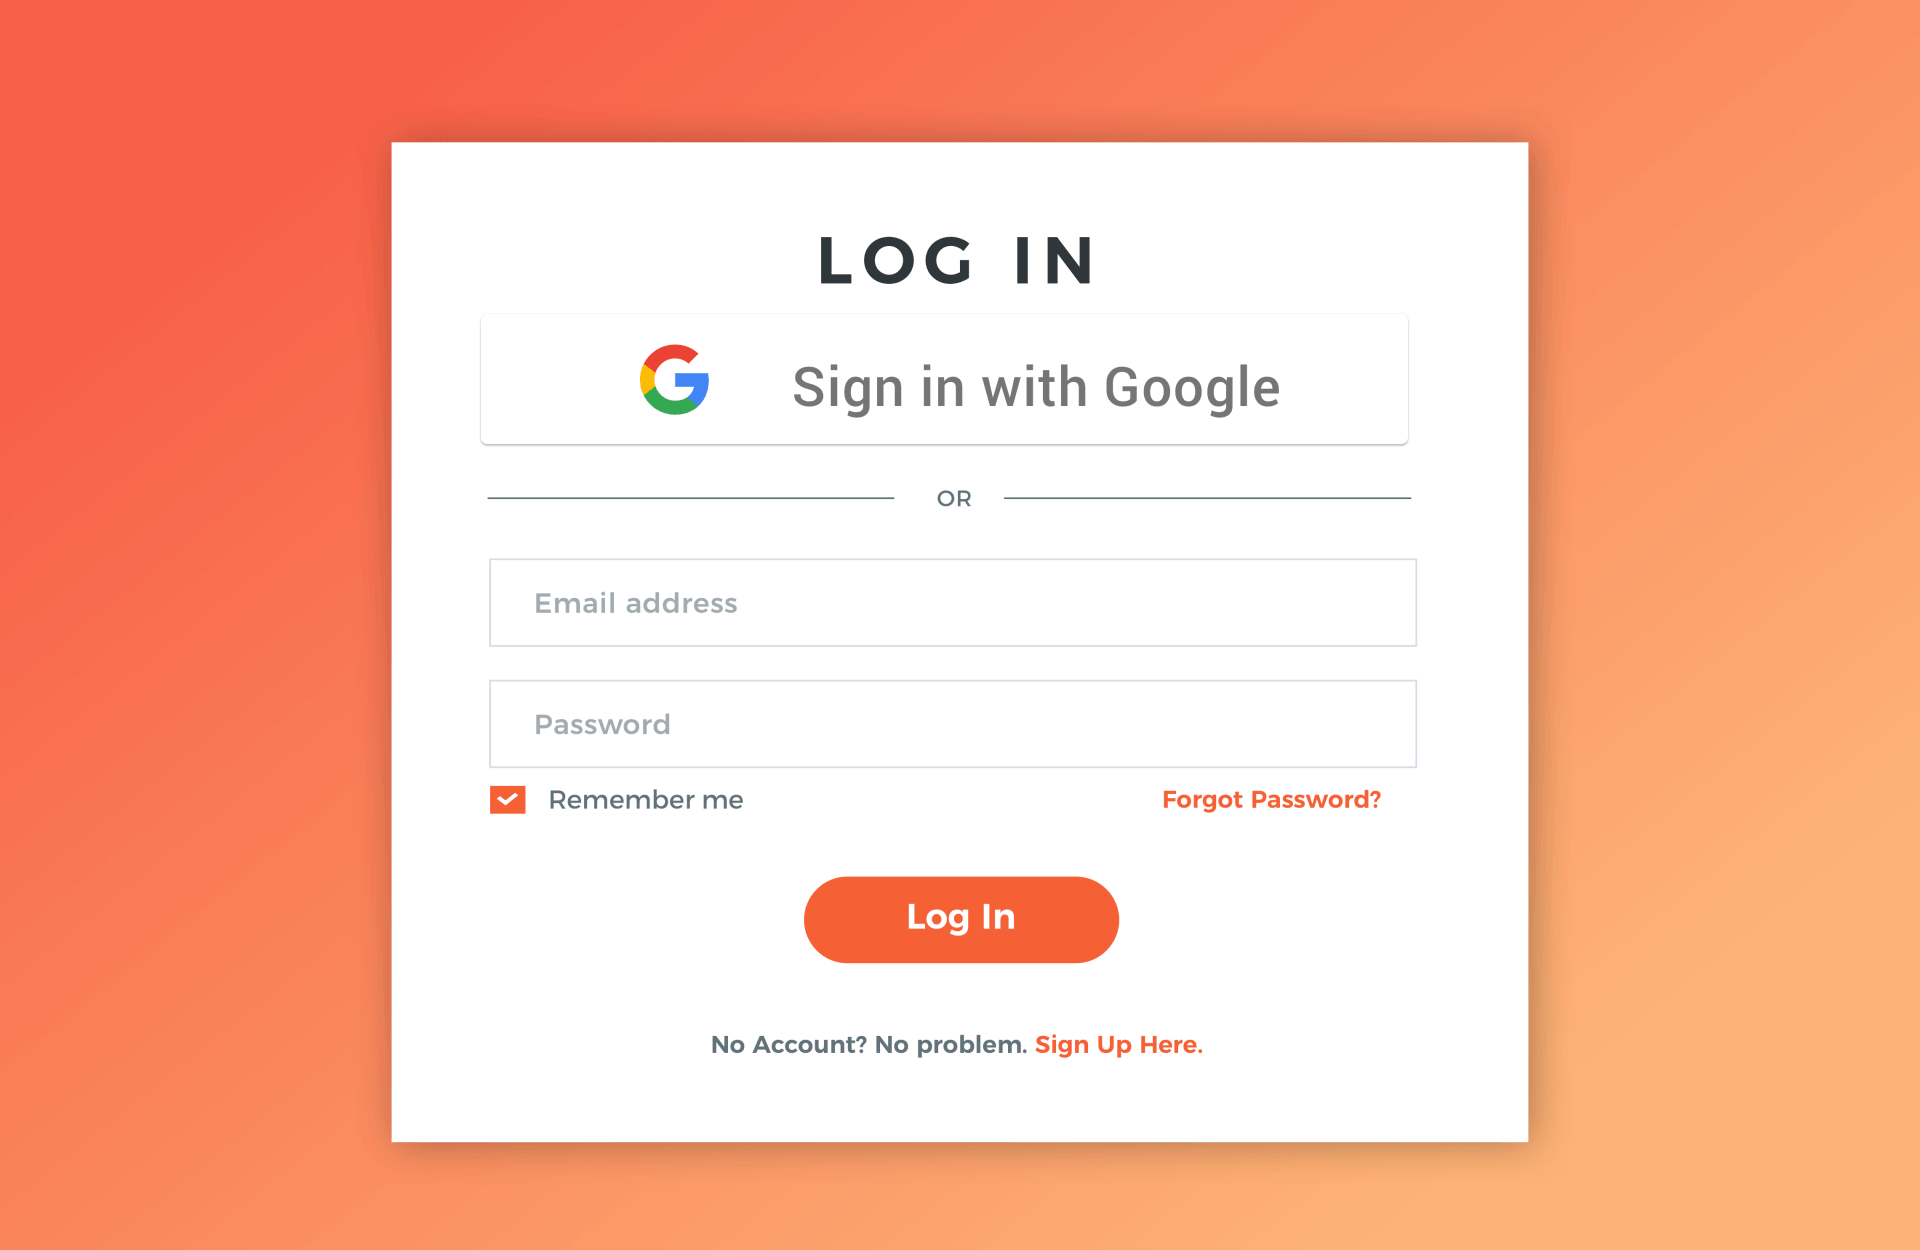 logging in with Google